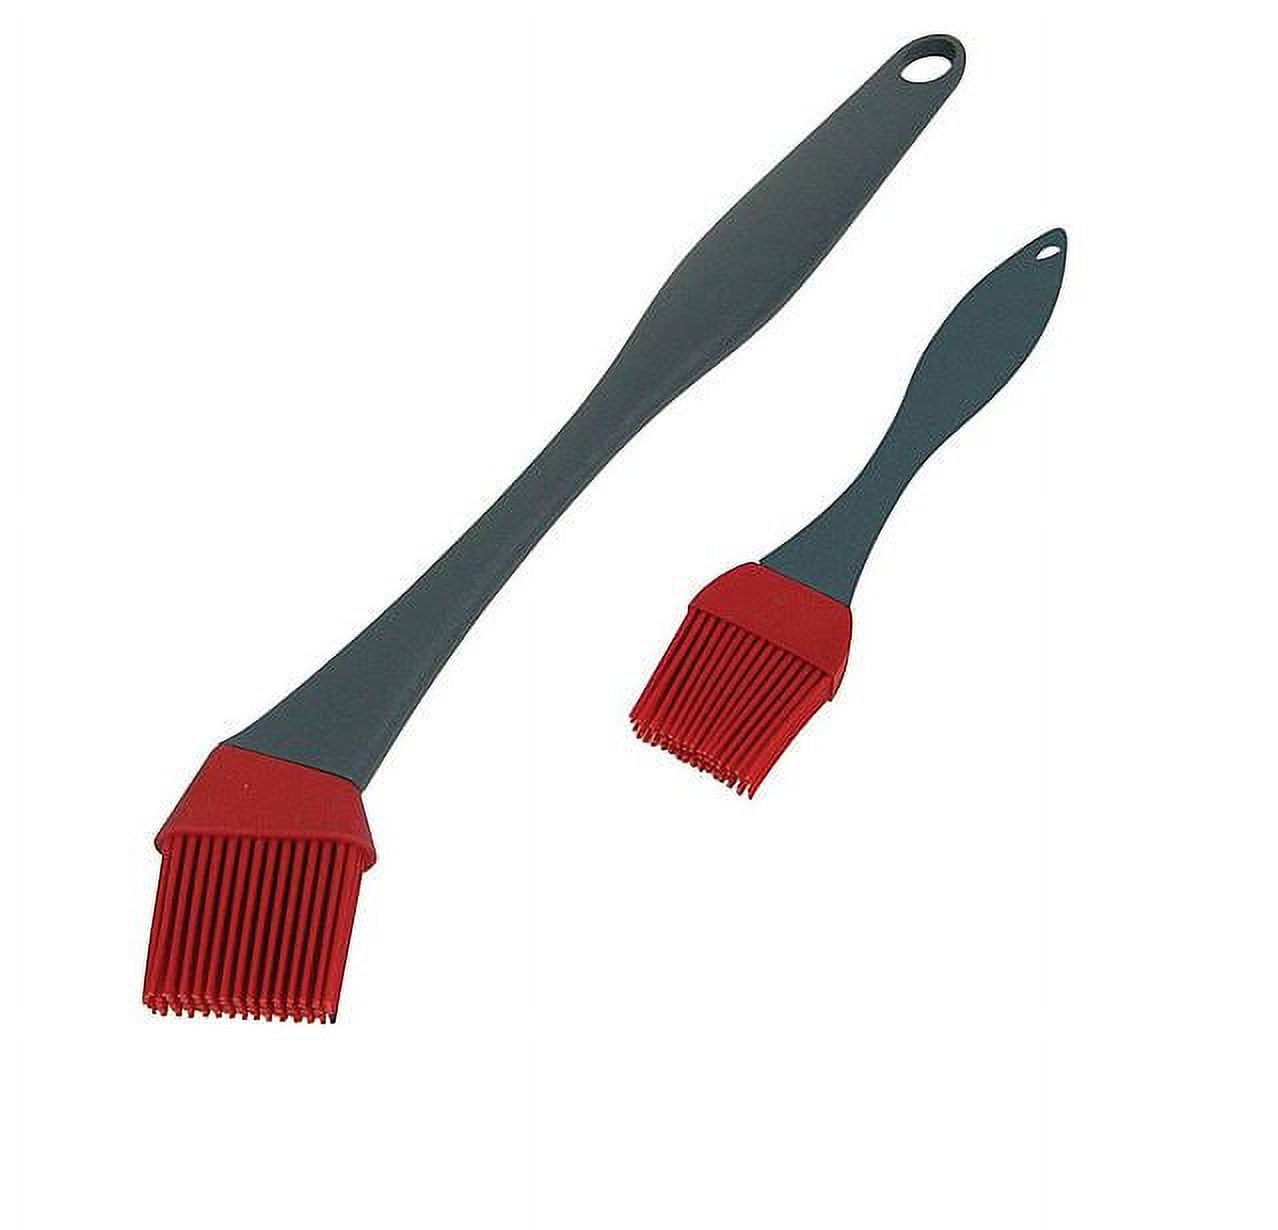 GrillPro Silicone 4" Basting Brush (2 Pack) - image 1 of 2